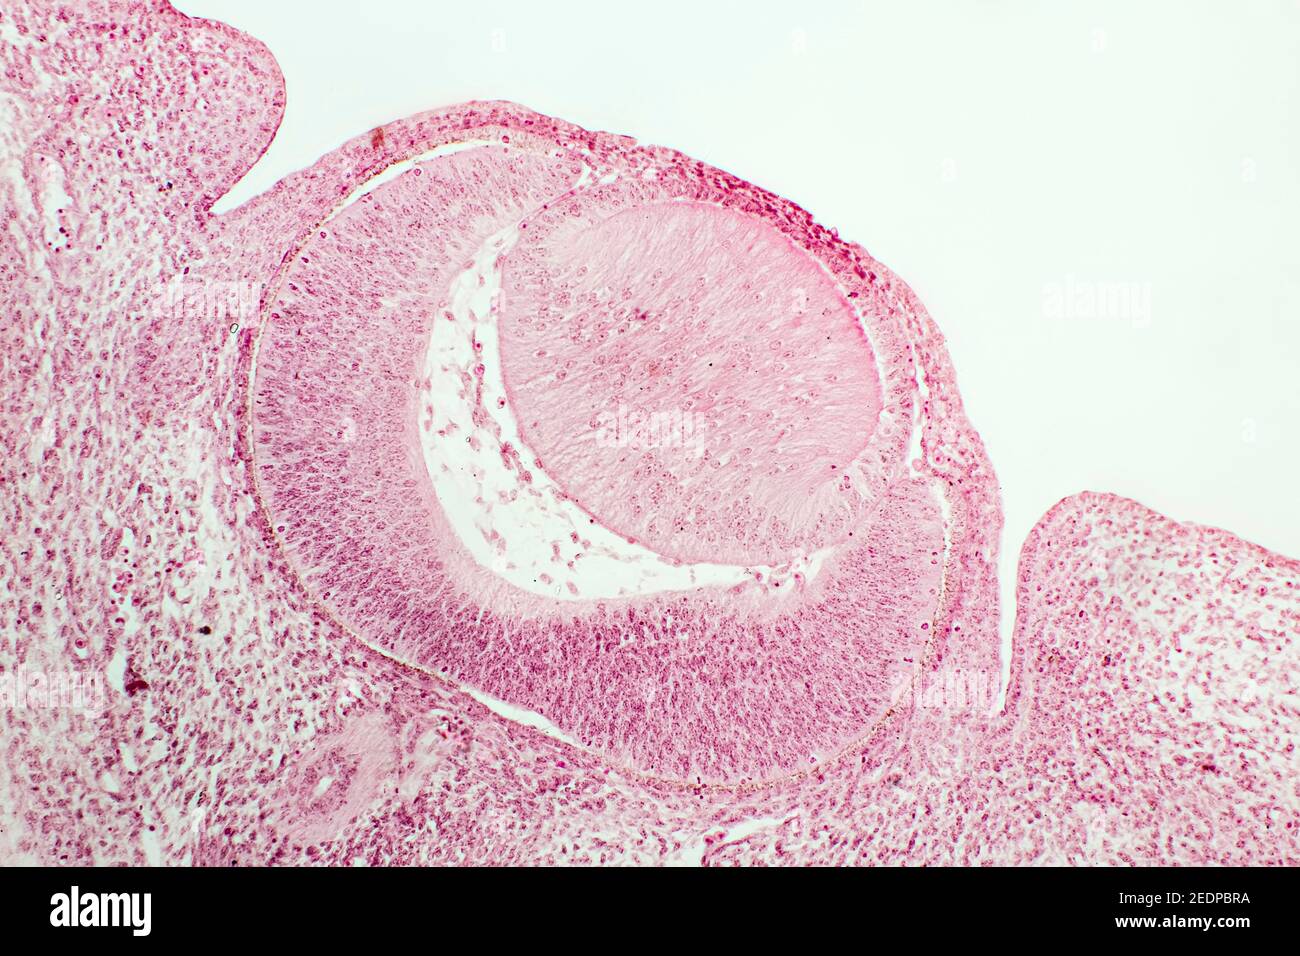 cross section of a head of a small mammal, embryo with first developmental stages of eyes, x 18 Stock Photo